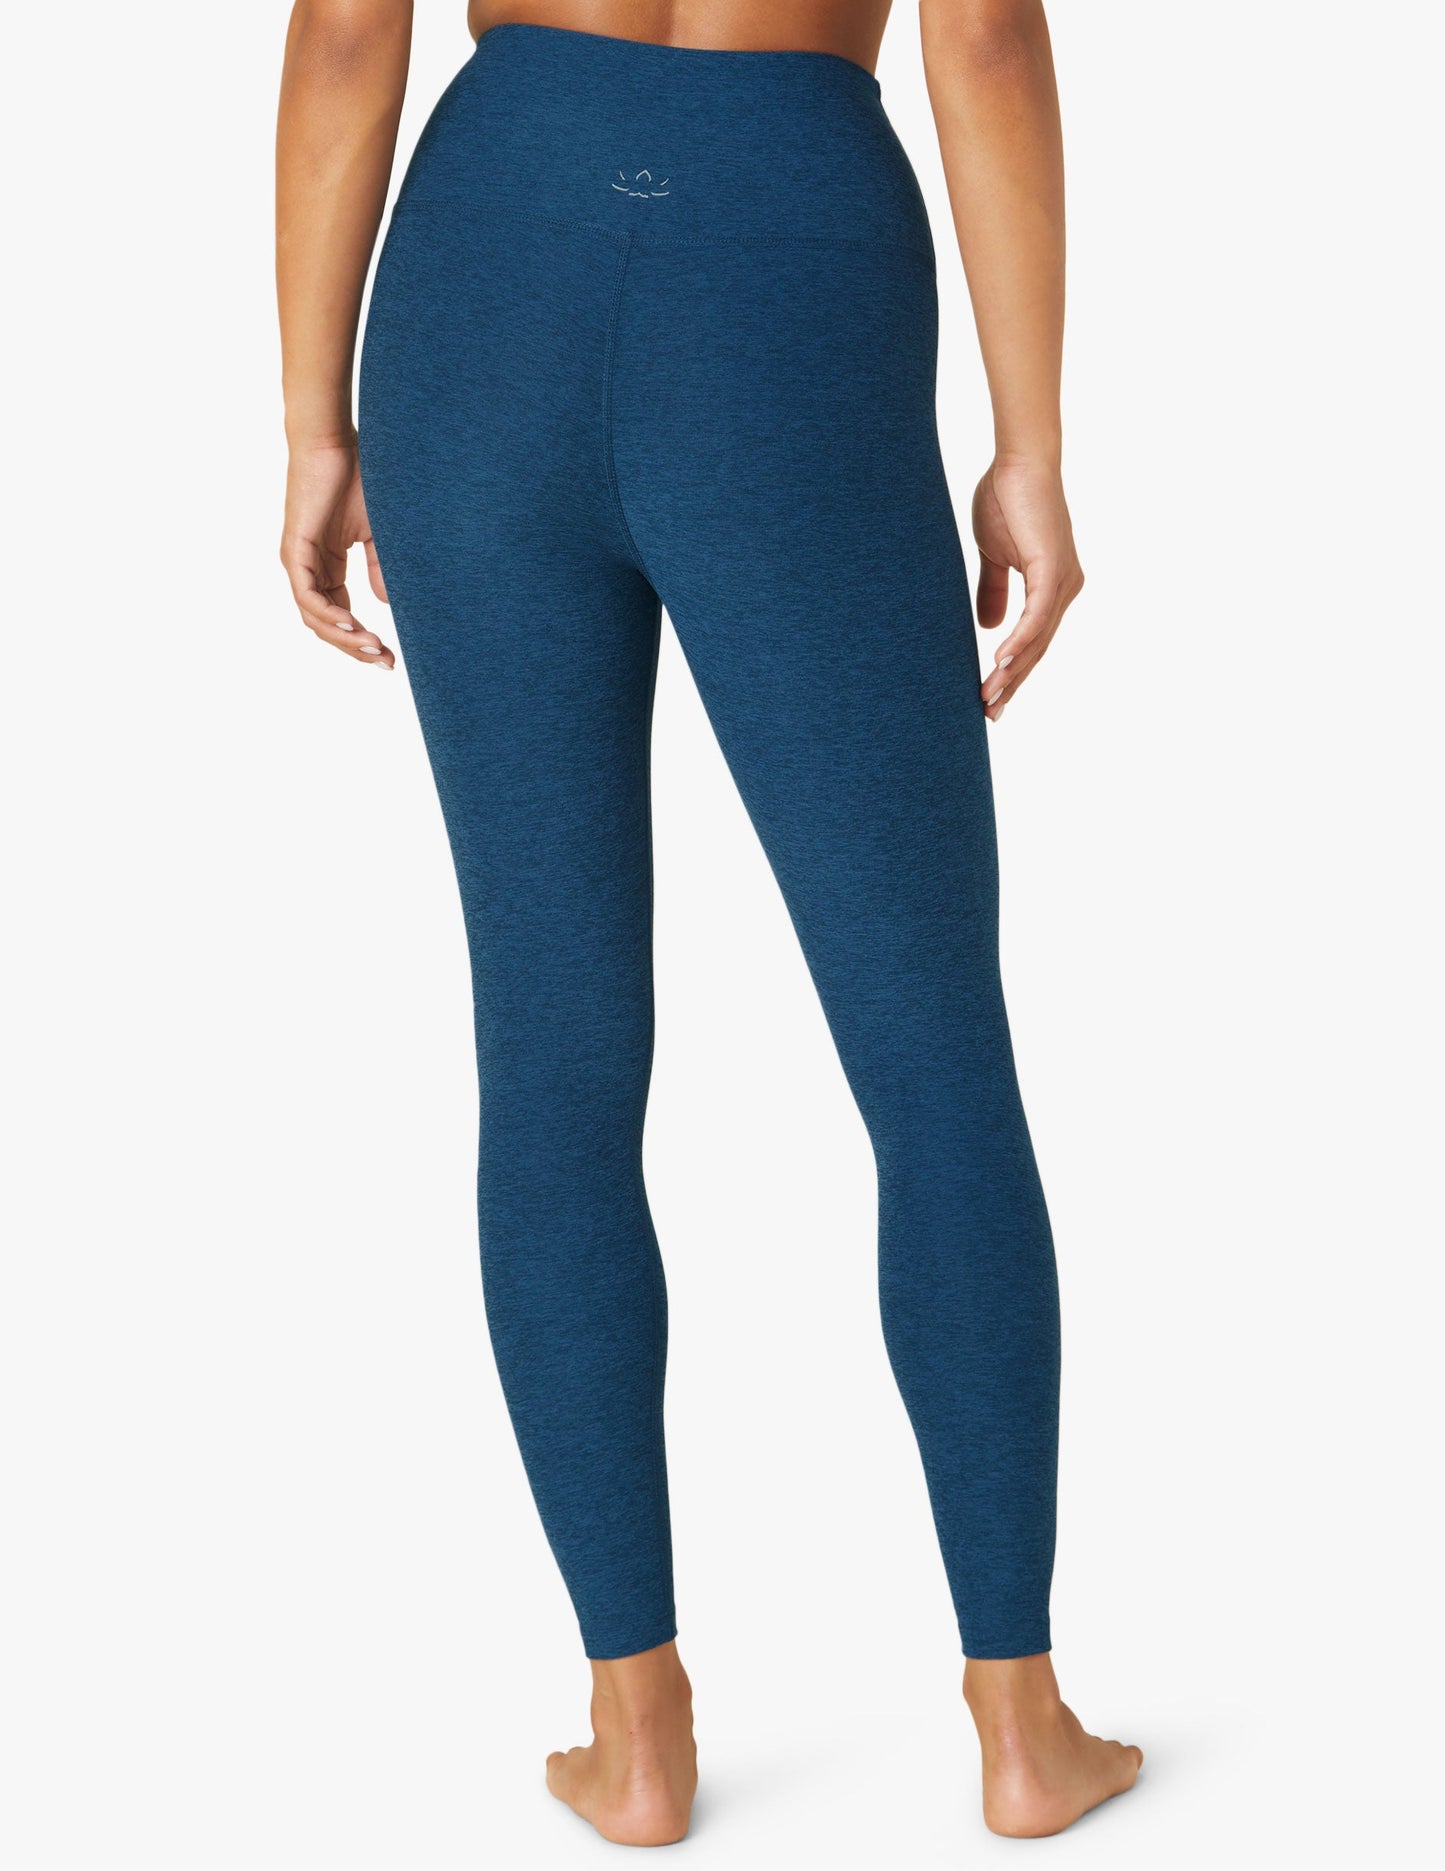 BEYOND YOGA CAUGHT IN THE MIDI HIGH WAISTED LEGGING CELESTIAL BLUE HEATHER